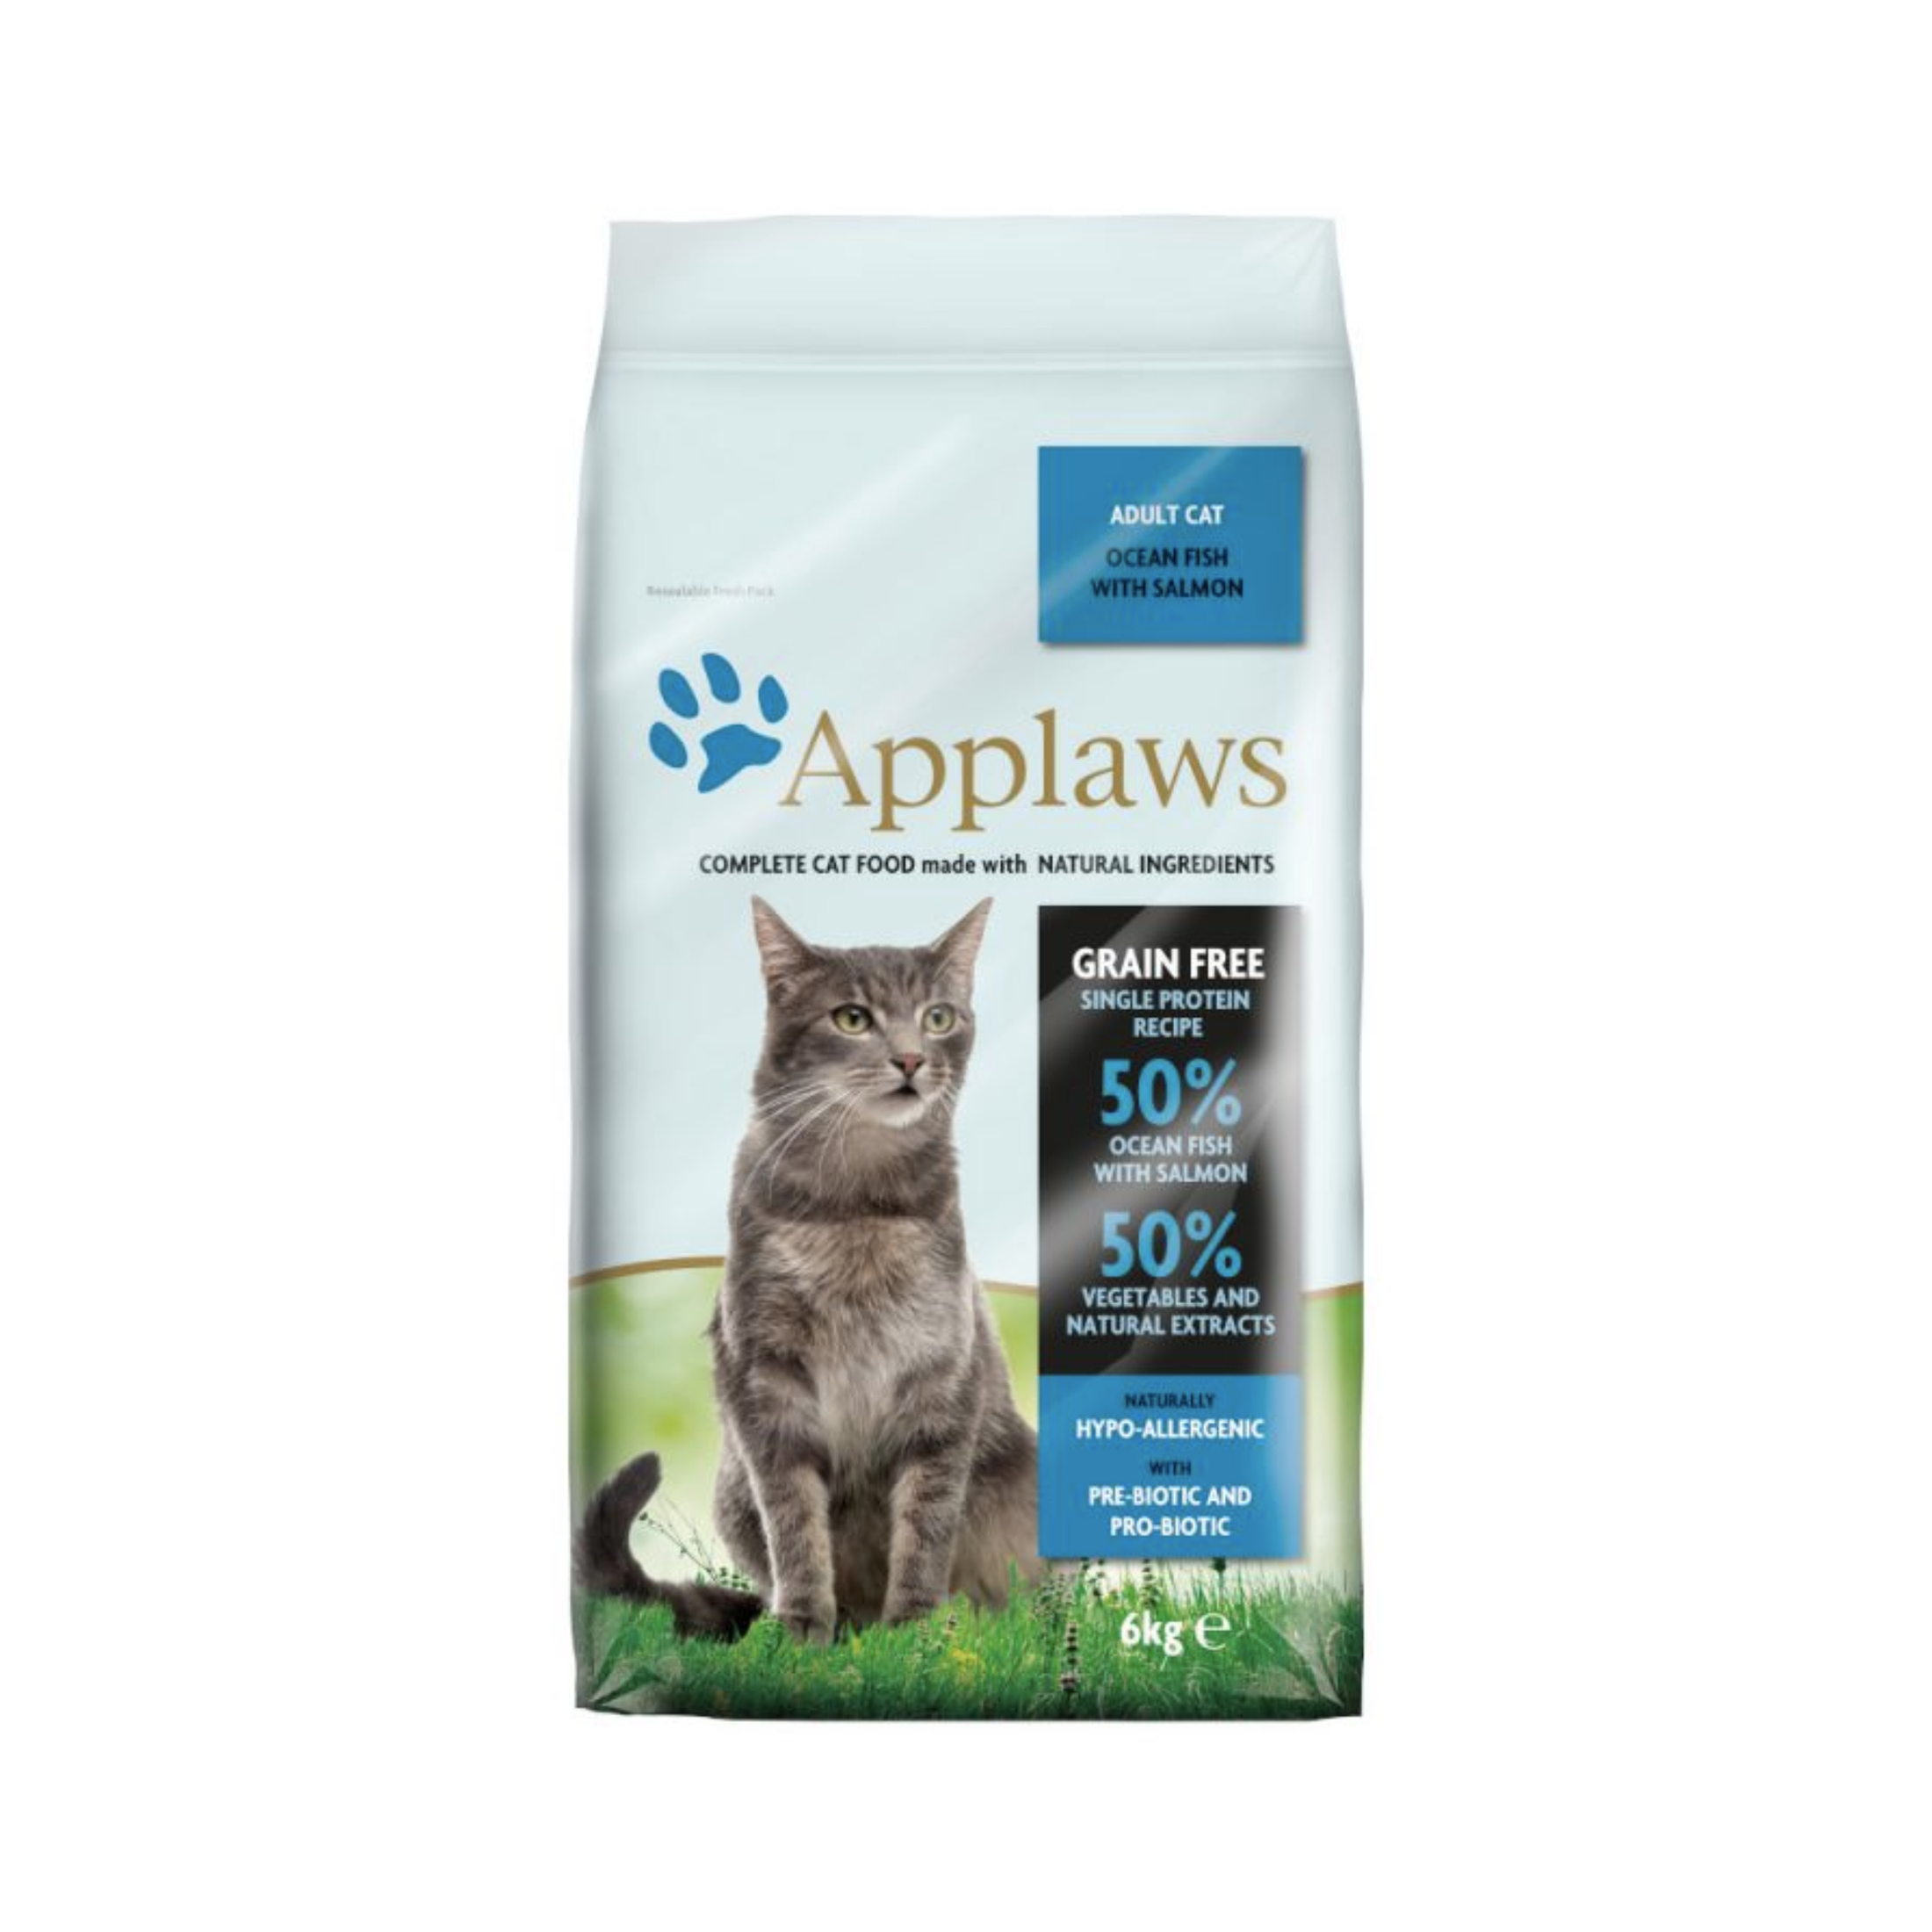 Applaws Adult Dry Cat Food - Ocean Fish with Salmon, Grain Free, Single Protein, Naturally Hypo-Allergenic, Pre-Biotic and Pro-Biotic, 350 g